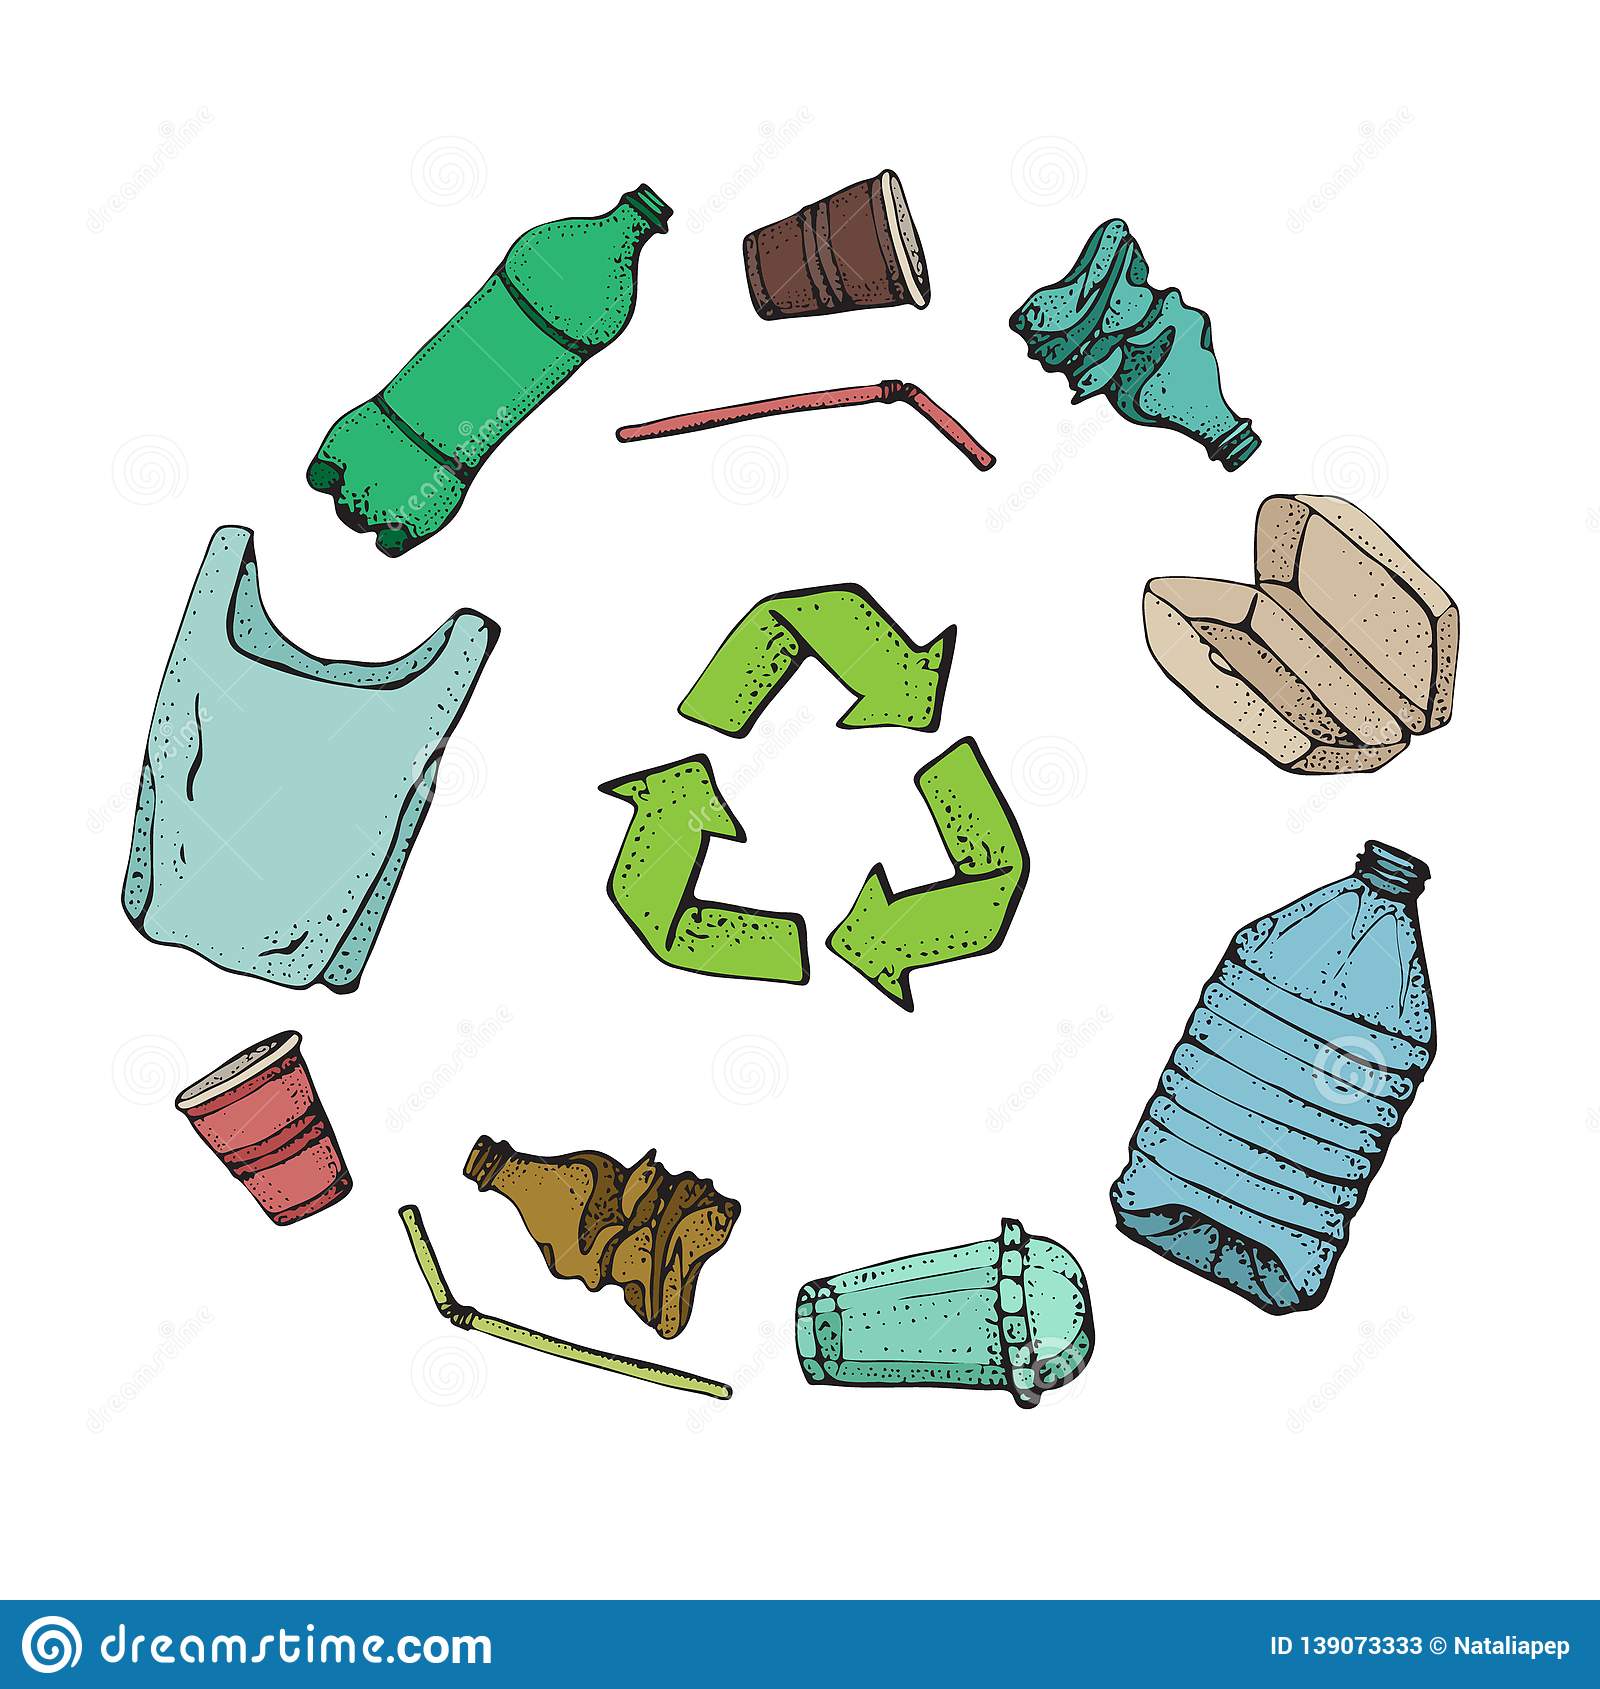 Recycling plastic products, end products and what else we can do 2-2